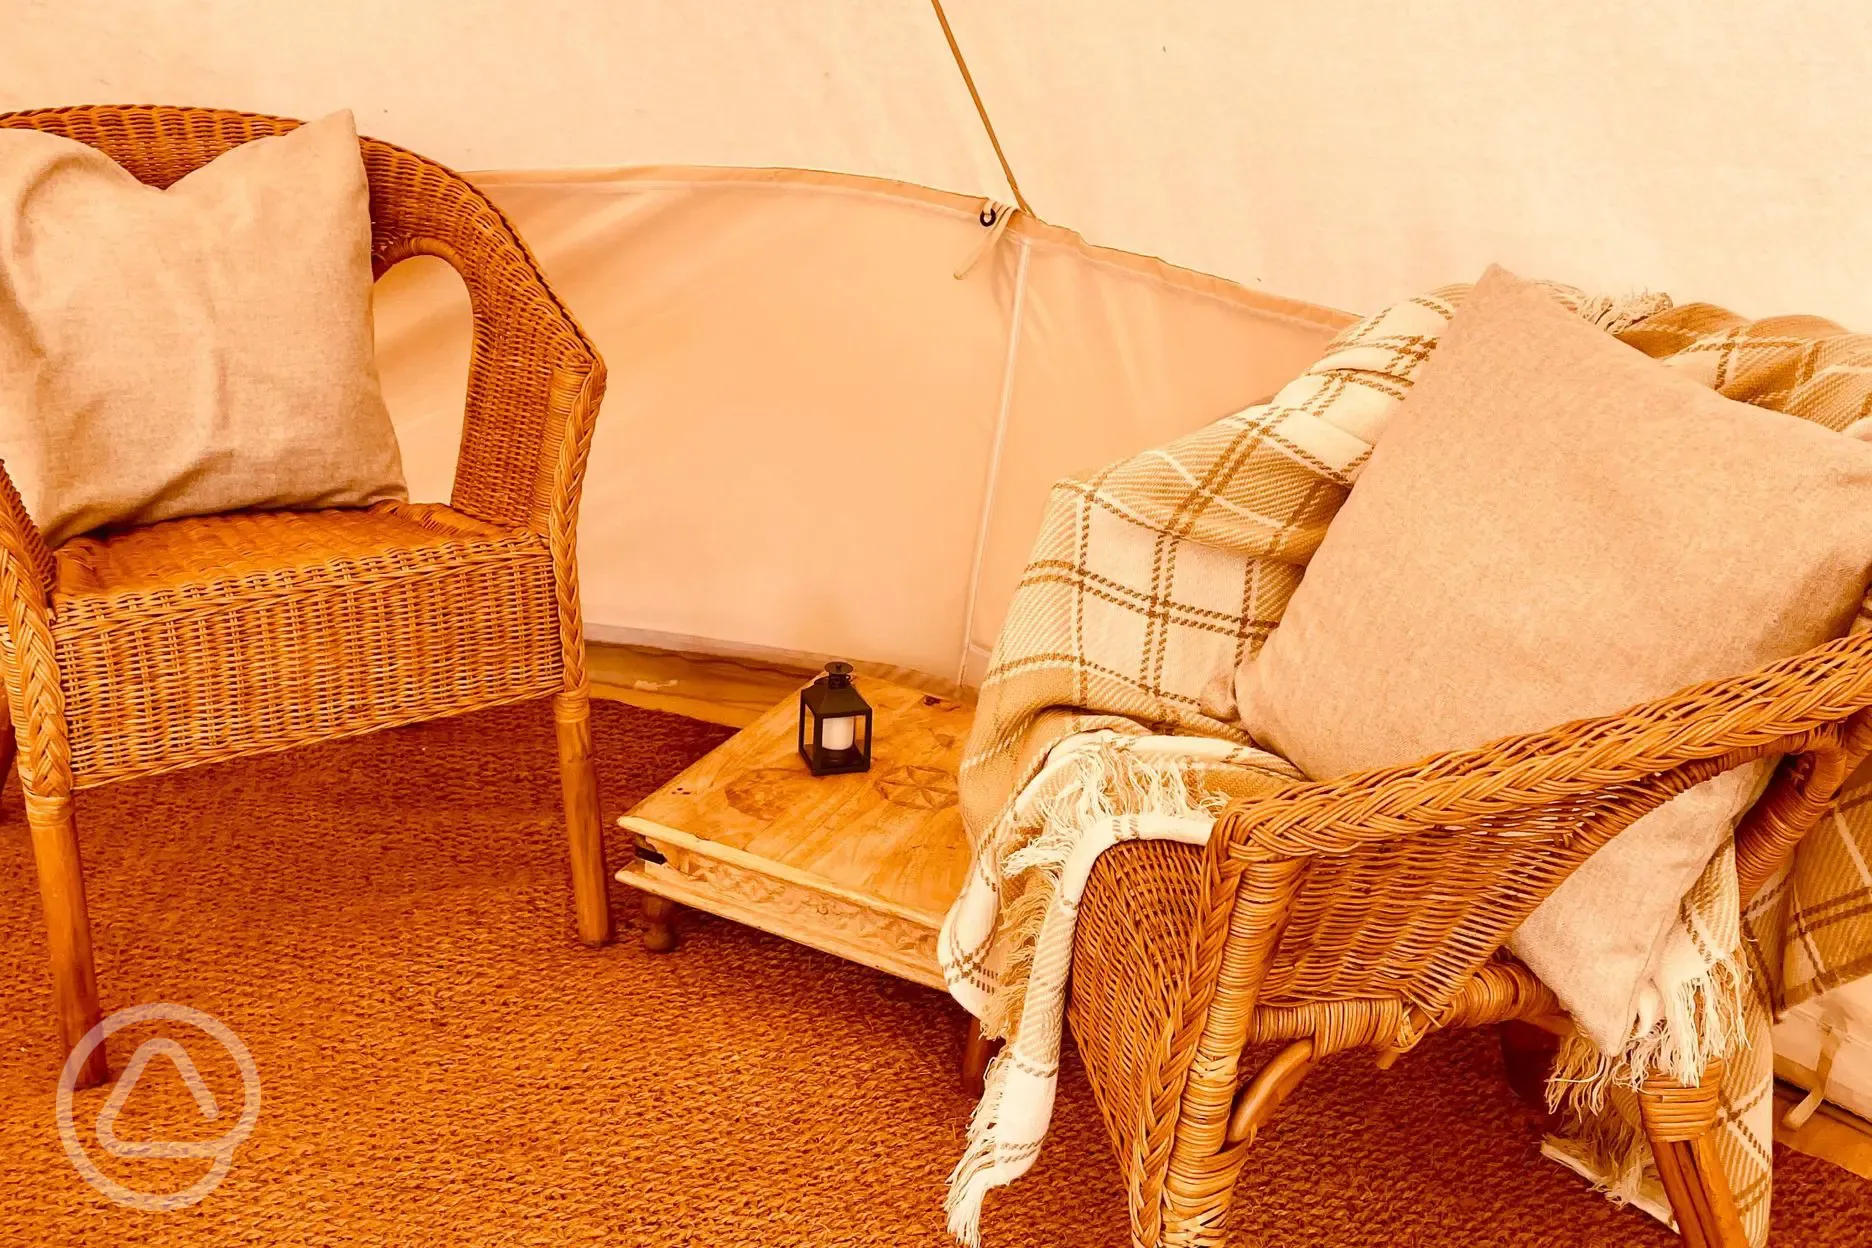 Tipi seating area